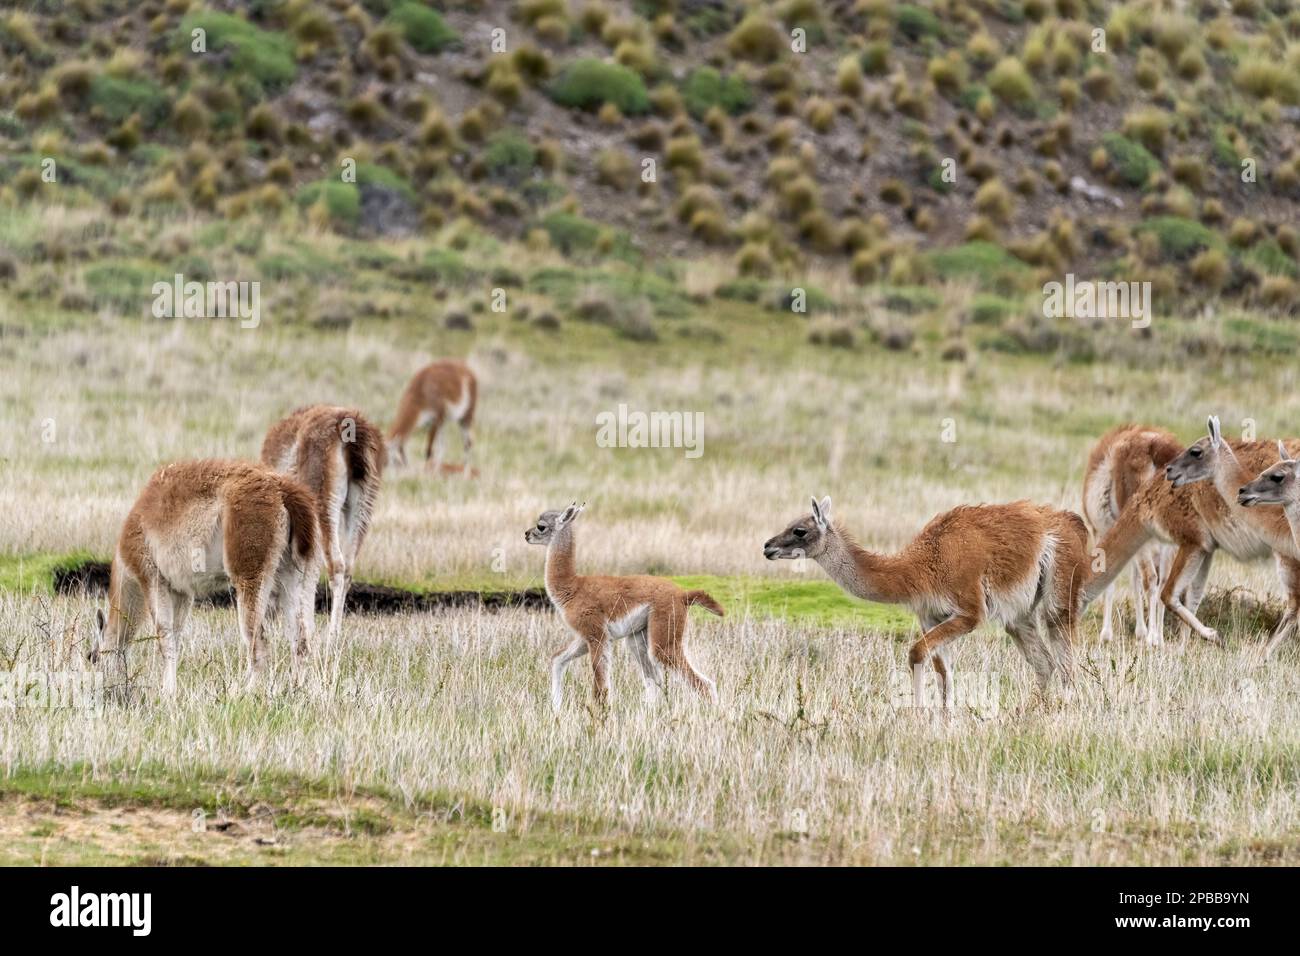 Herd of guanacos (Lama guanicoe) with mother and chulengo, Chacabuco Valley, Patagonia Stock Photo